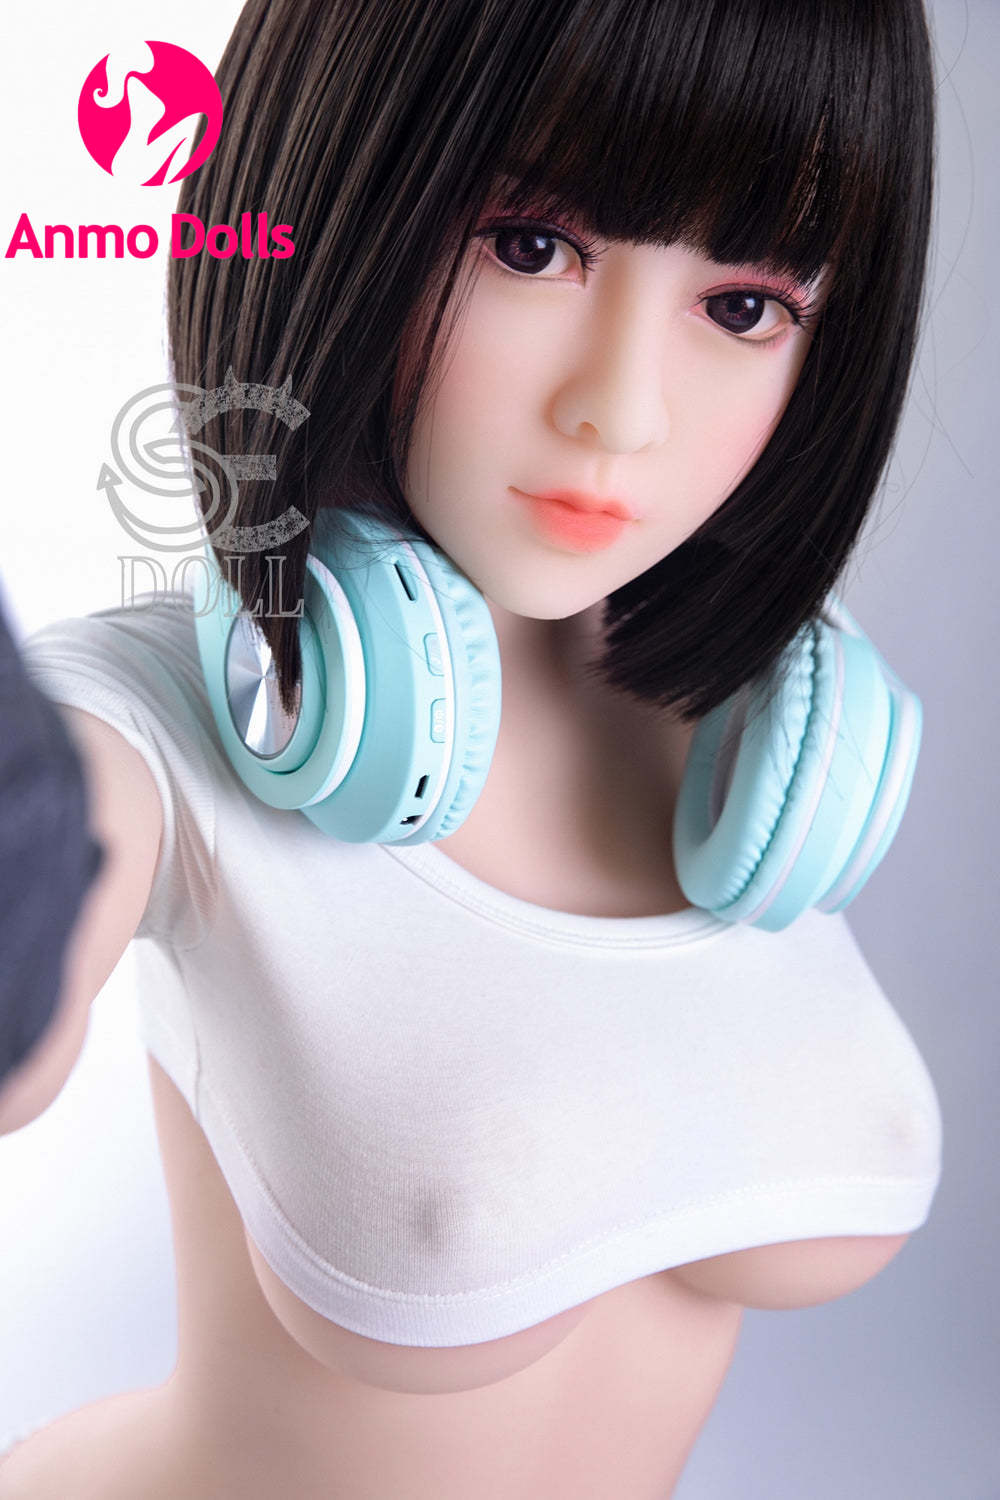 Kian - Fit body TPE sex doll and face look like a baby